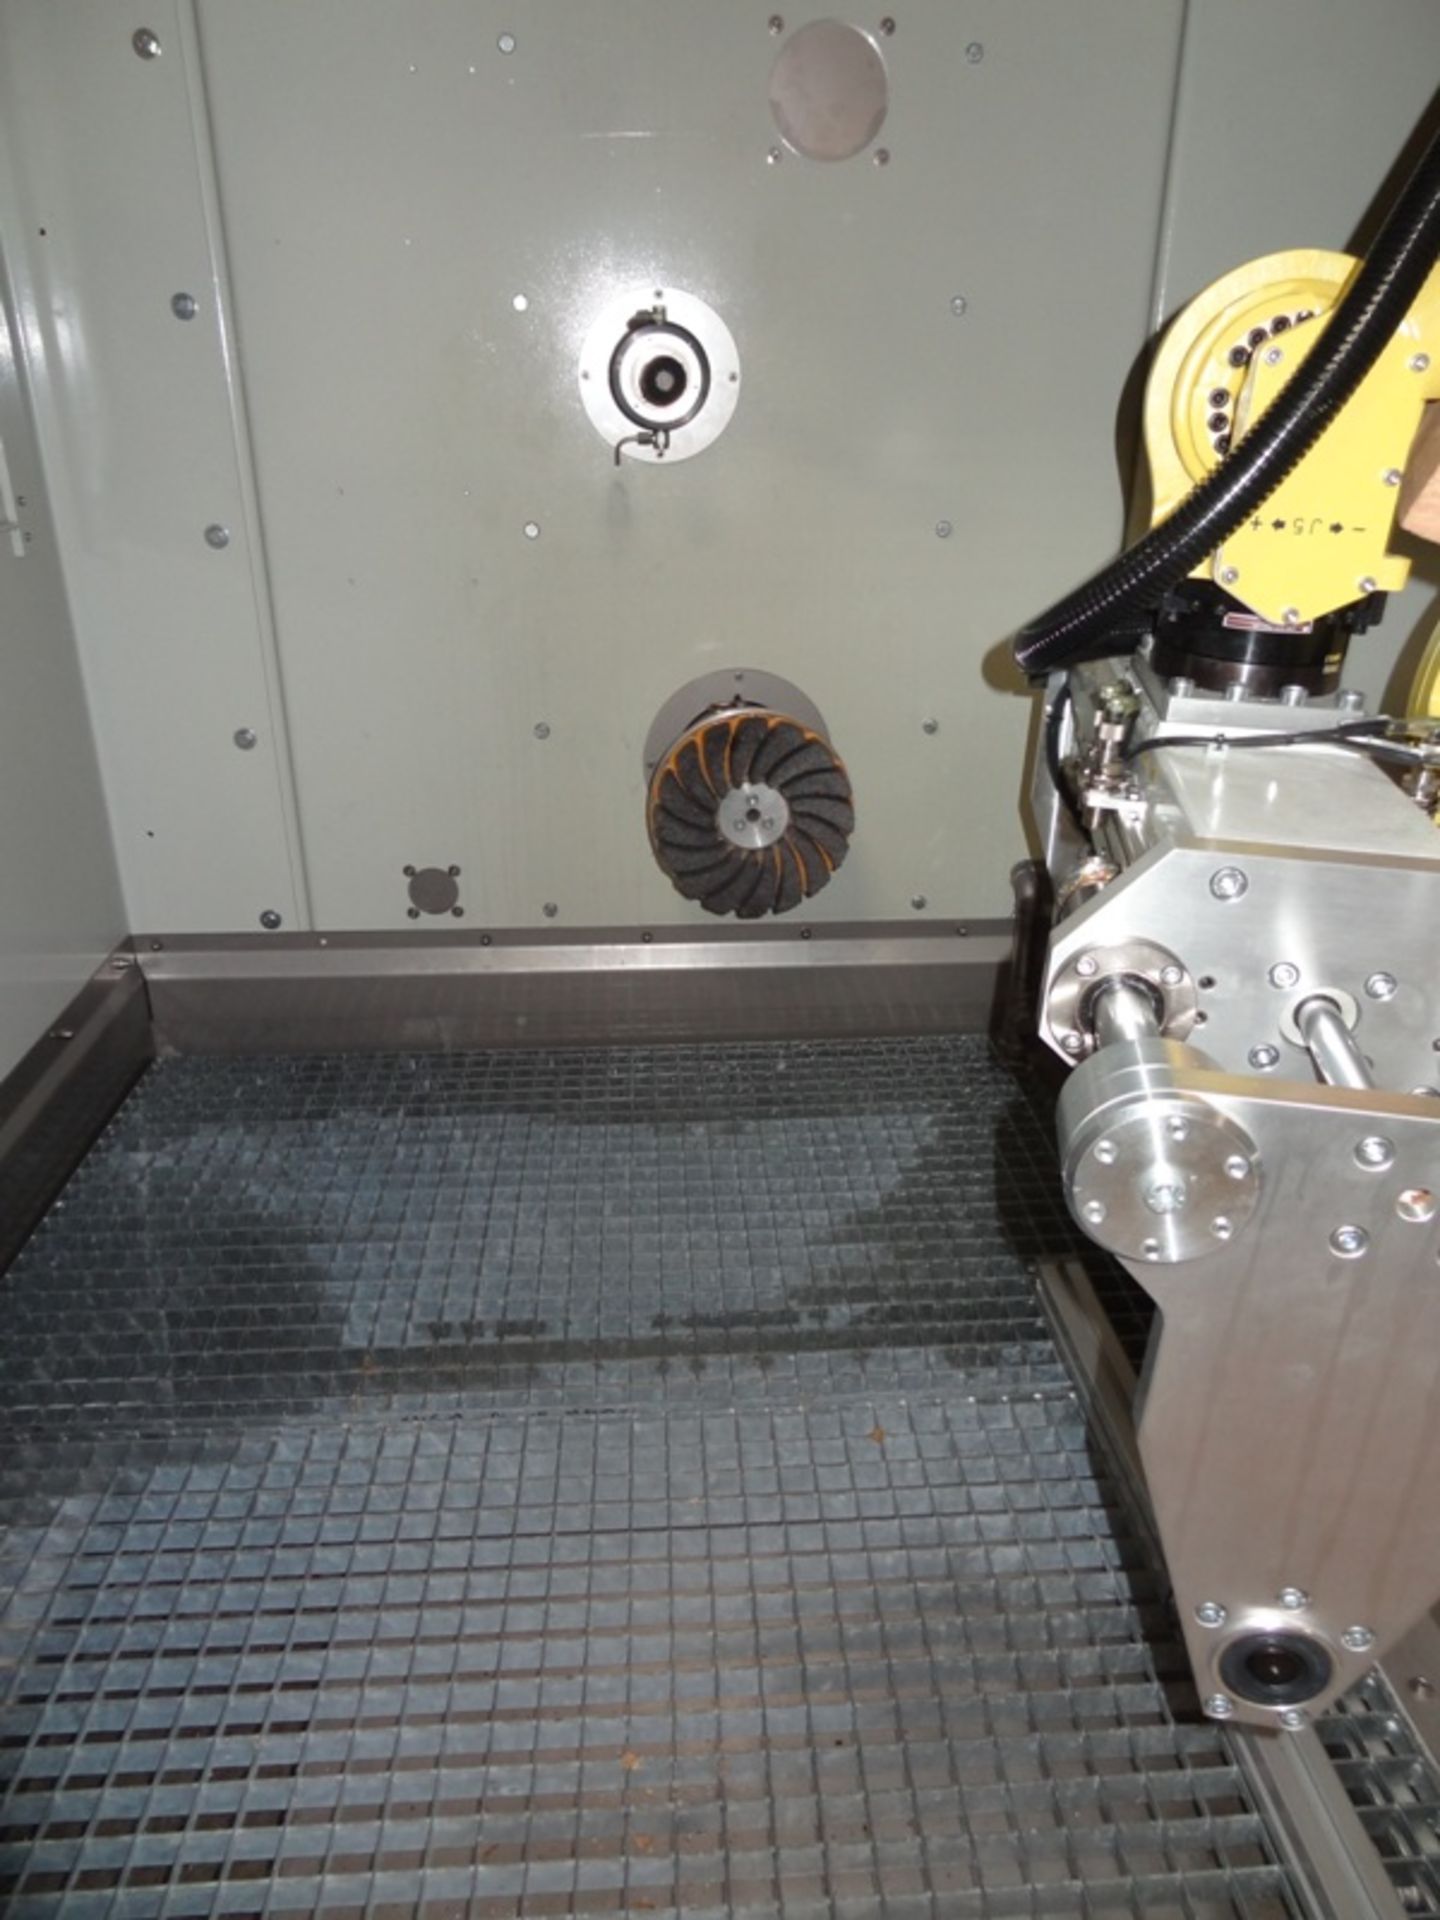 FANUC M710iC/70 FOUNDRY PRO ROBOTIC WET DEBURRING/POLISHING CELL, NEW IN CRATE, SN F92242 - Image 5 of 19